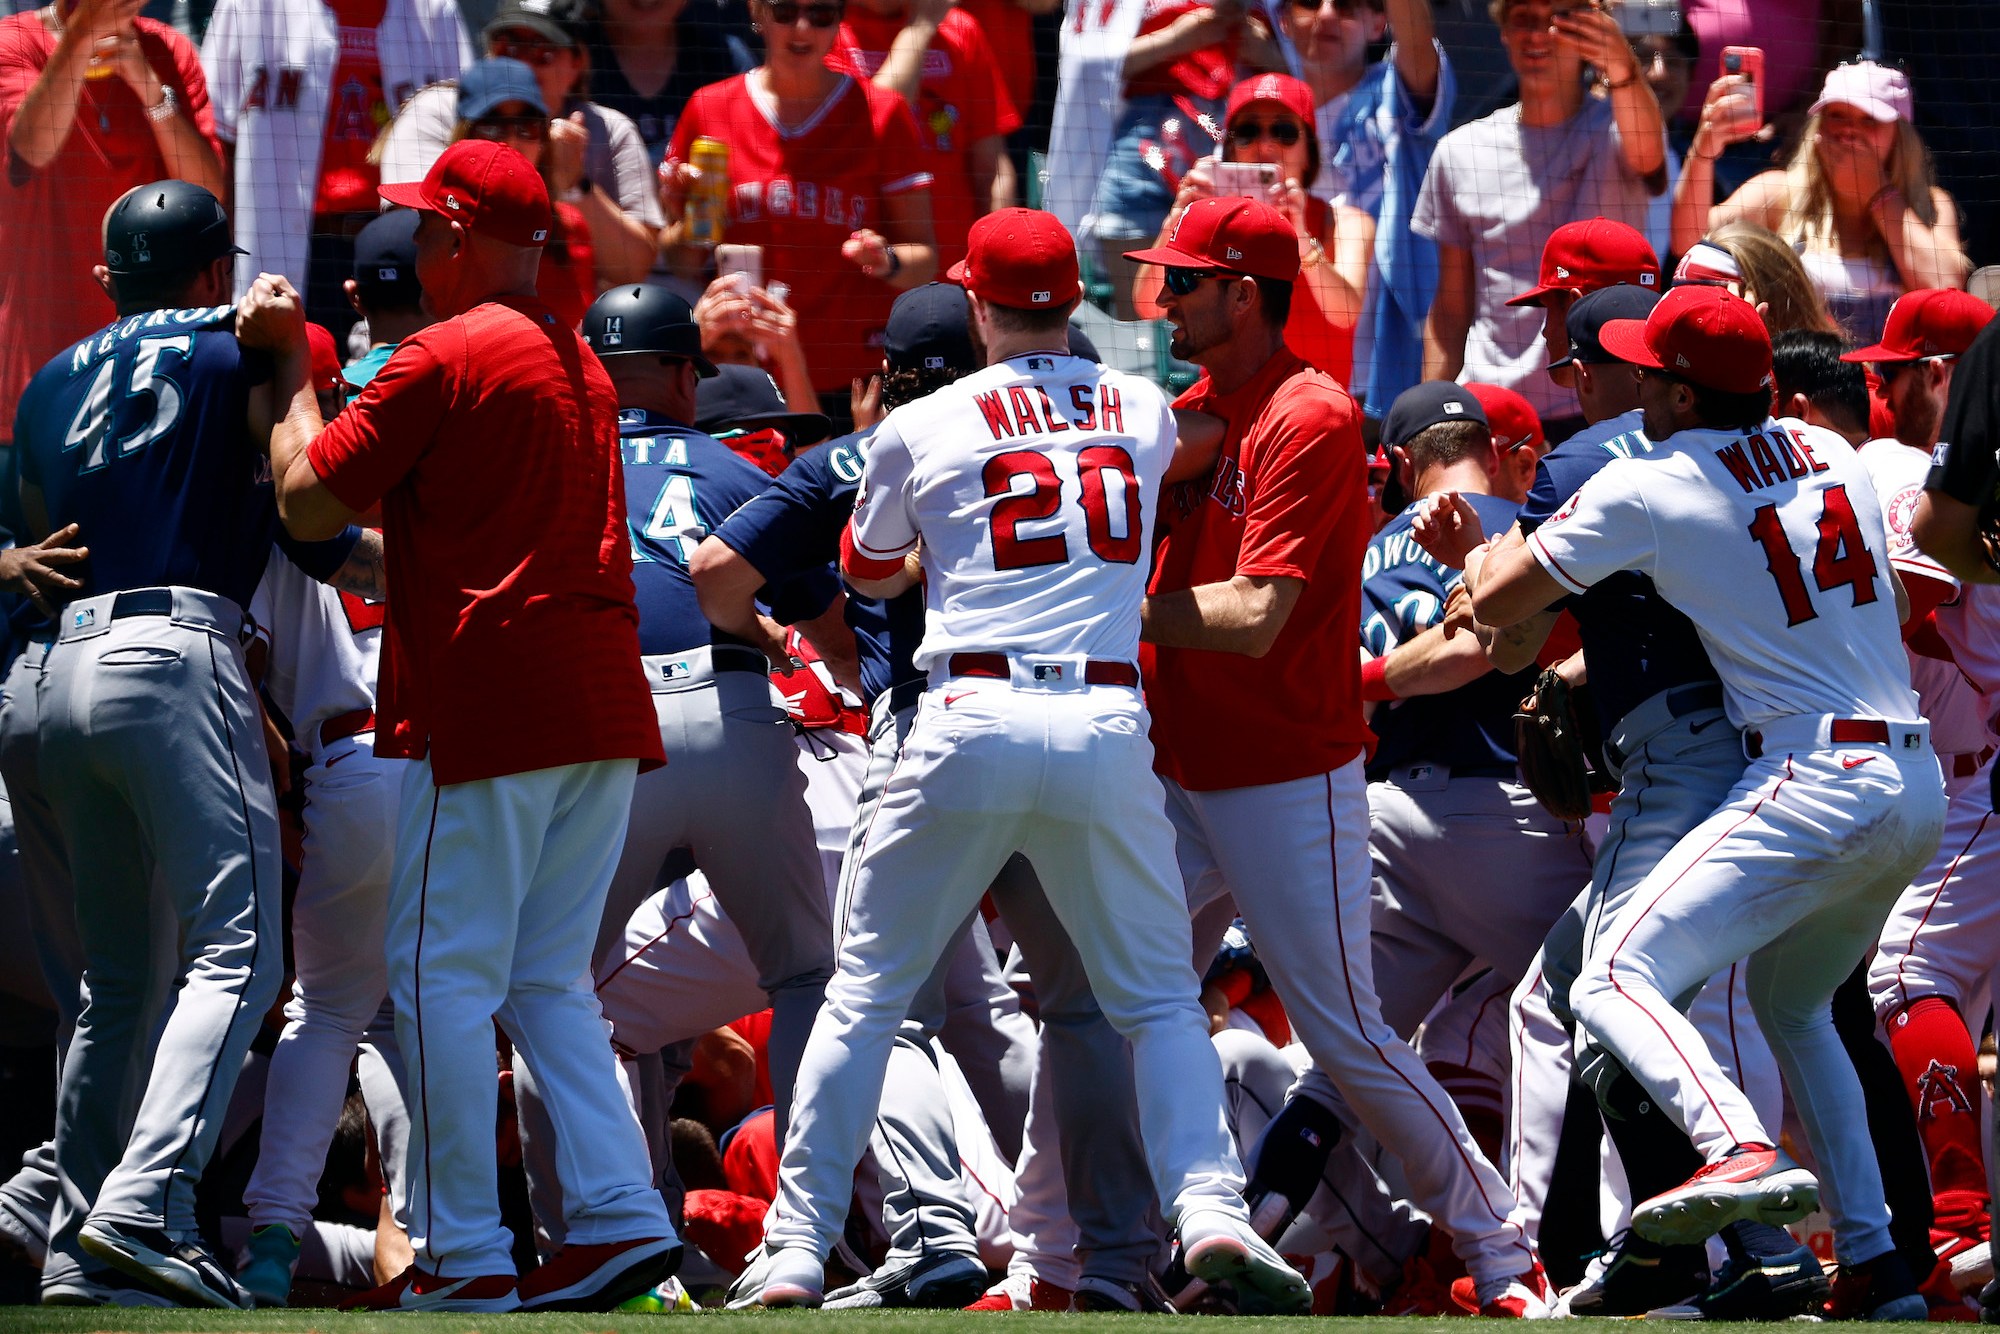 ANAHEIM, CALIFORNIA - JUNE 26: The Seattle Mariners and the Los Angeles Angels clear the benches after Jesse Winker #27 of the Seattle Mariners charged the Angels dugout after being hit by a pitch in the second inning at Angel Stadium of Anaheim on June 26, 2022 in Anaheim, California. (Photo by Ronald Martinez/Getty Images)